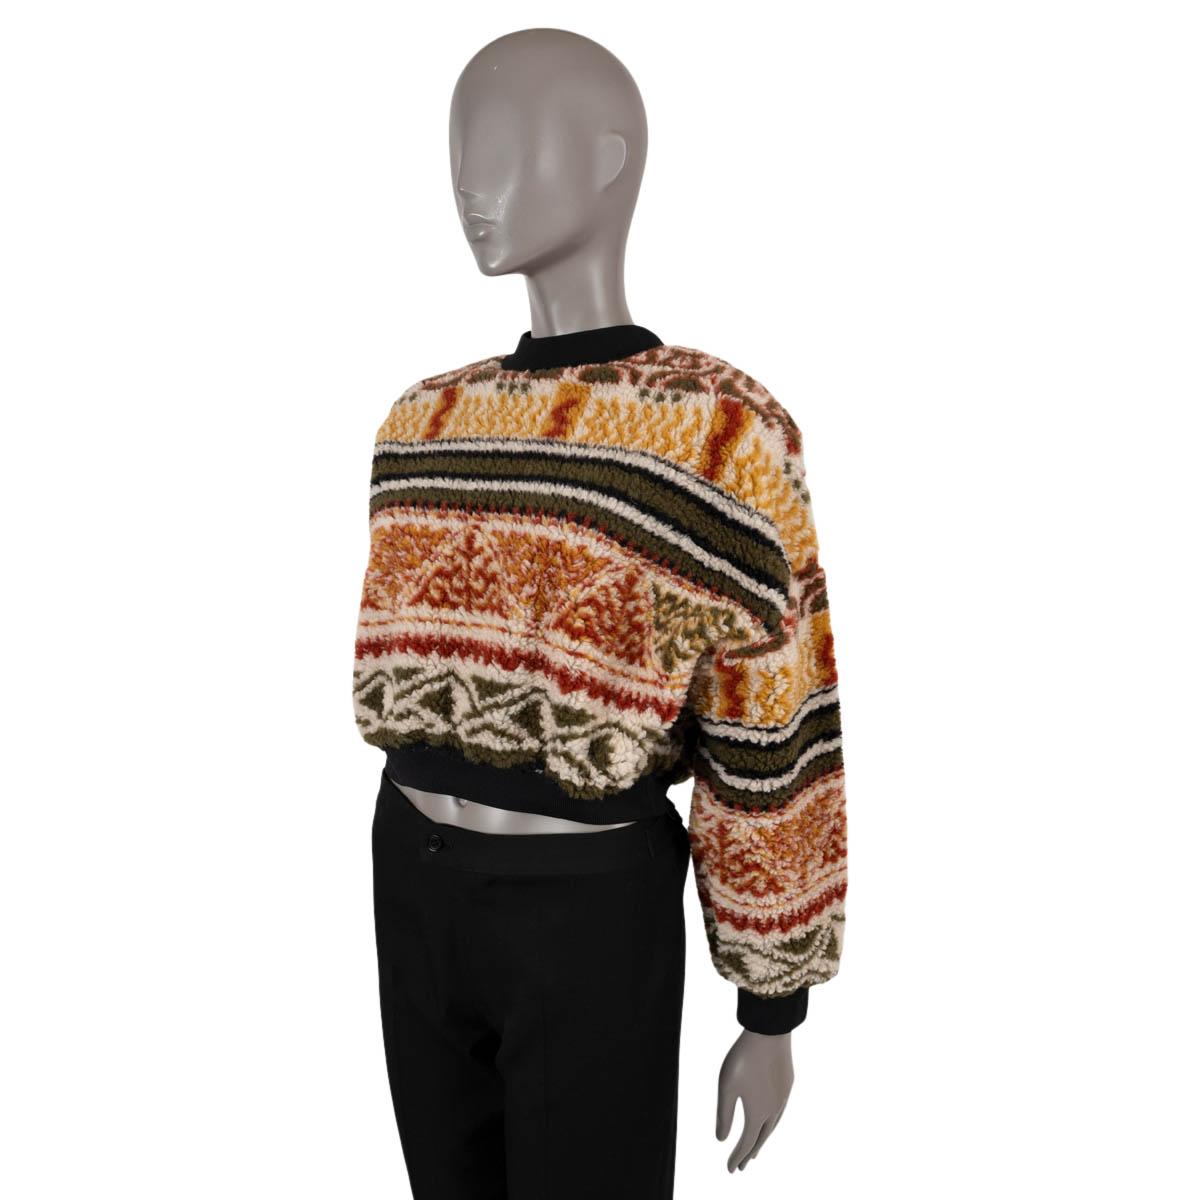 100% authentic Etro multicolour teddy jacquard cropped jumper in wool (22%) and polyester (78%) featuring high neck, long sleeves and elasticated black cuffs. Brand new. 

2021 Fal/Winter

Measurements
Tag Size	40
Size	S
Shoulder Width	60cm